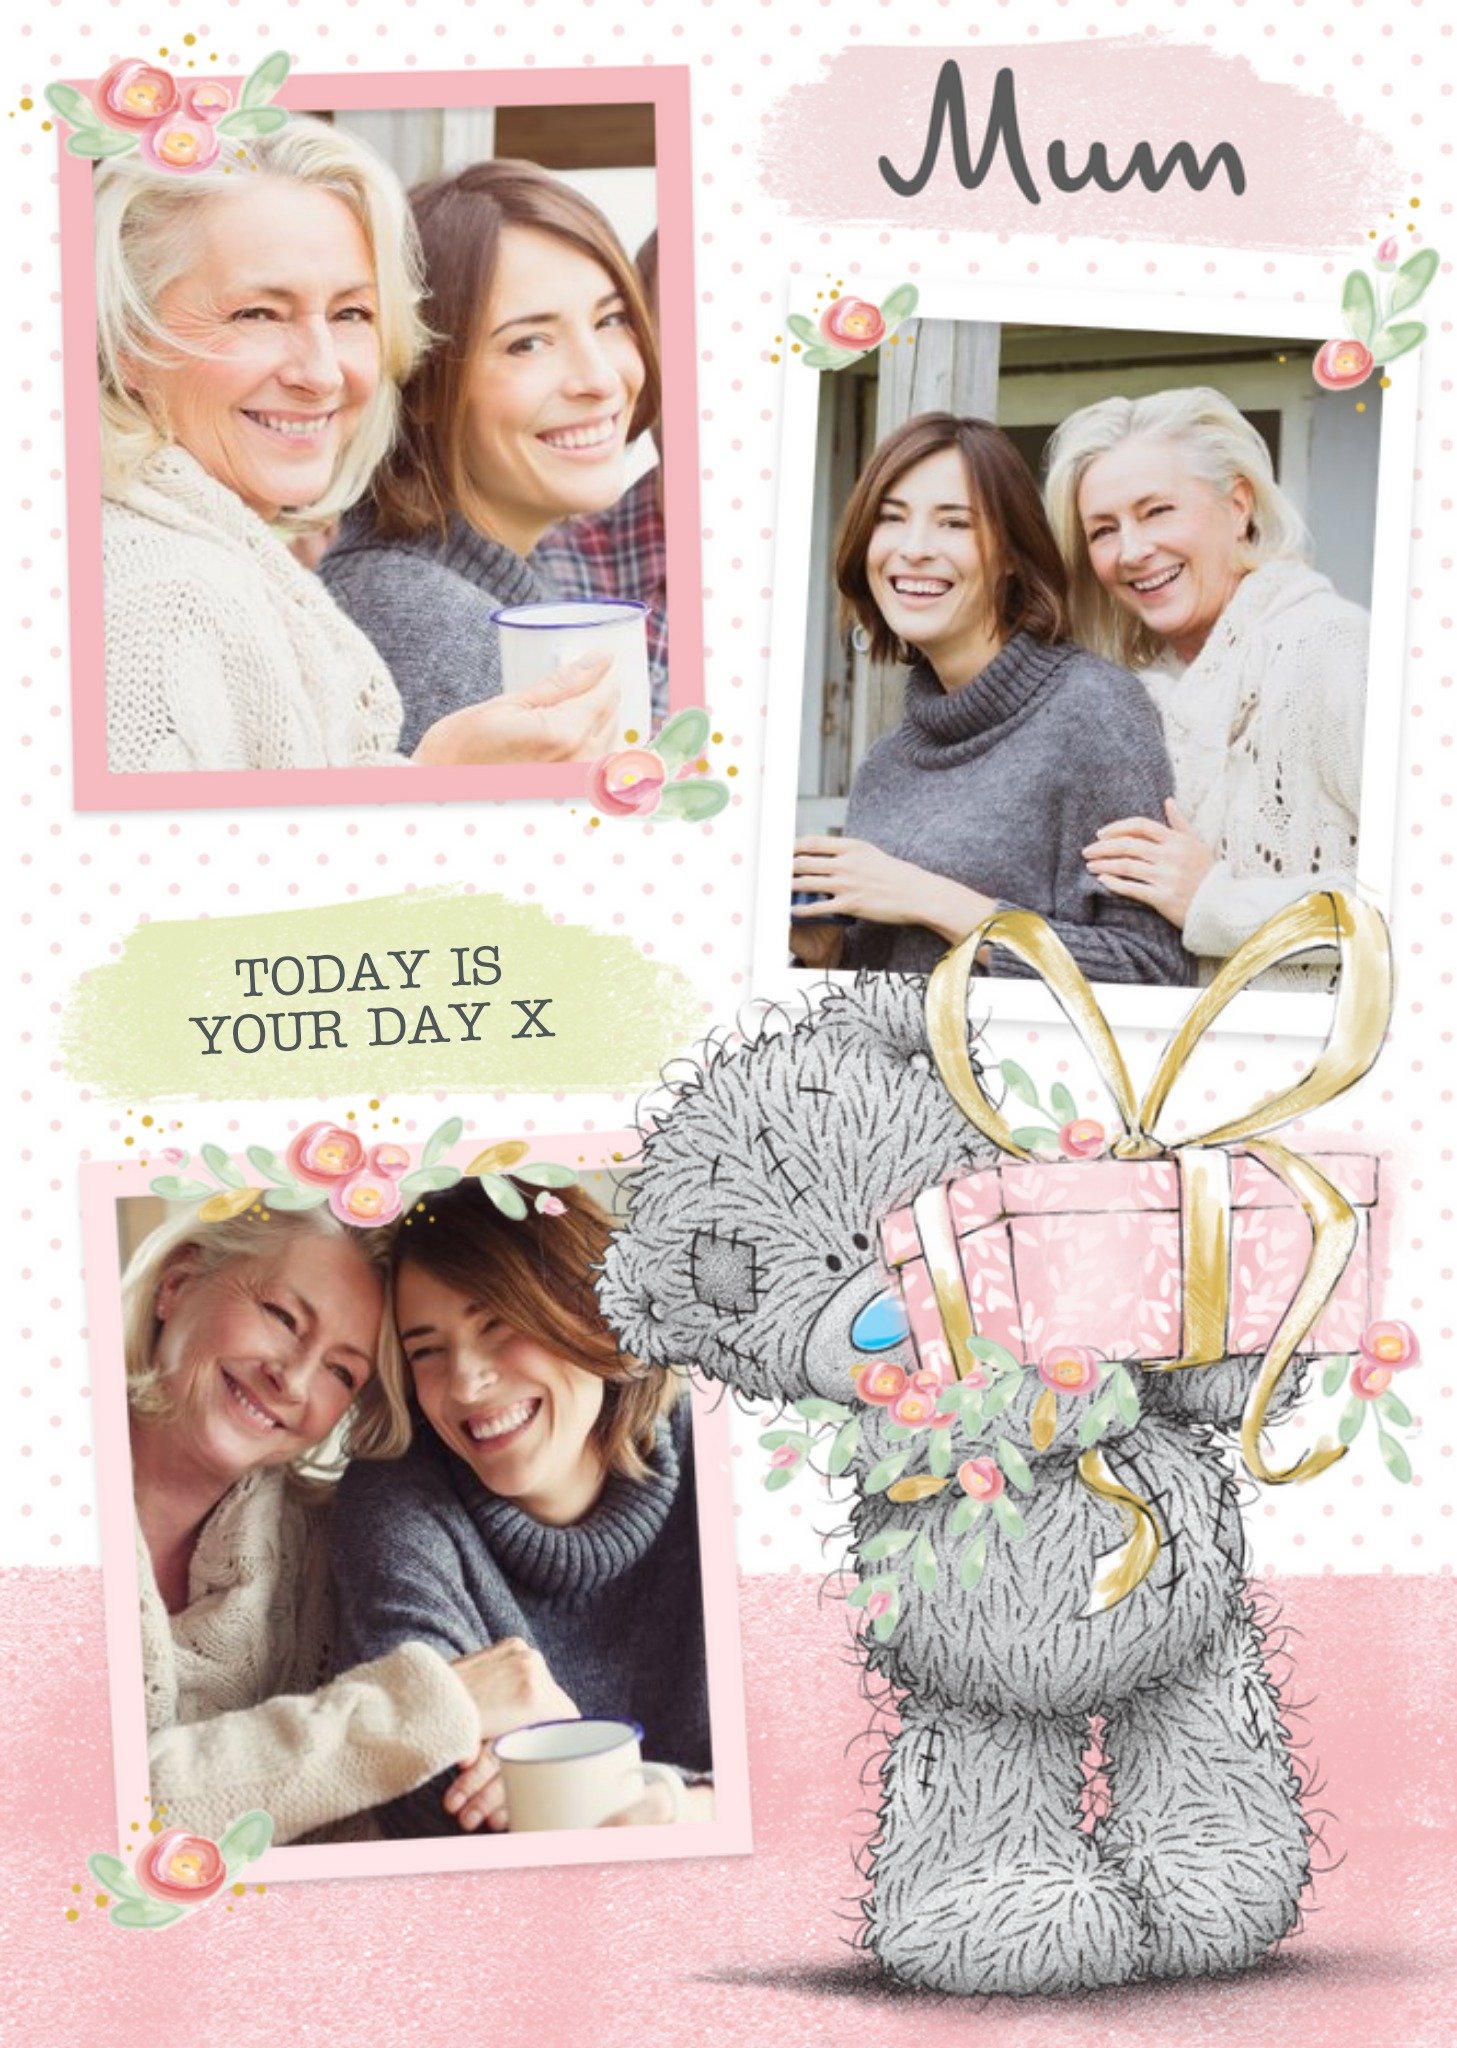 Me To You Mother's Day Card - Mum - Tatty Teddy - Photo Upload Card, Large